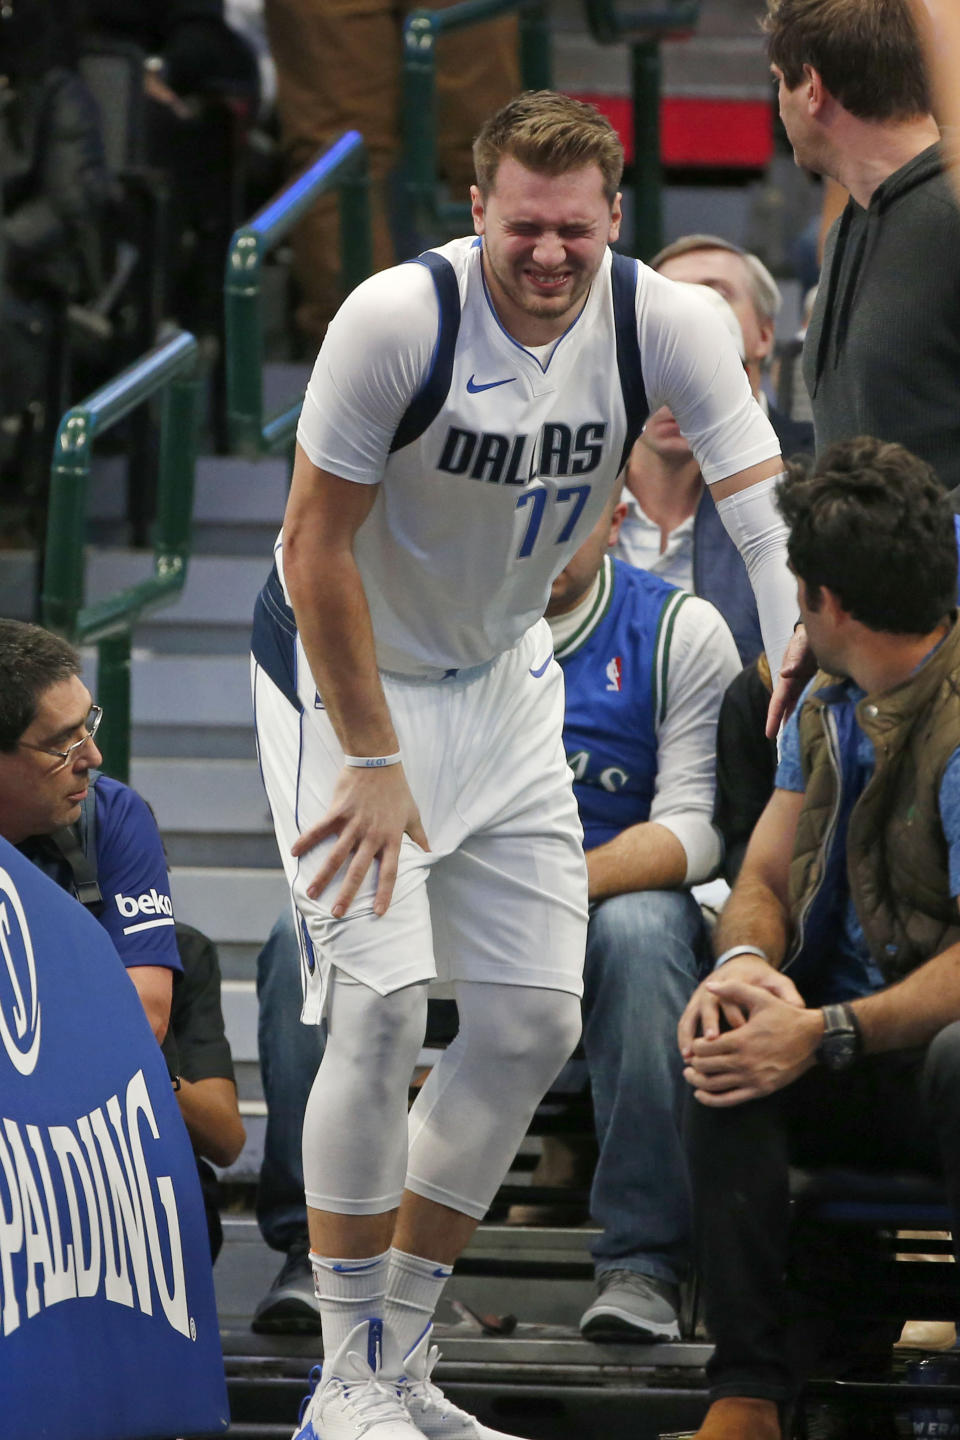 Dallas Mavericks forward Luka Doncic (77) reacts after injuring himself against the Miami Heat during the first half of an NBA basketball game in Dallas, Saturday, Dec 14, 2019. (AP Photo/Michael Ainsworth)